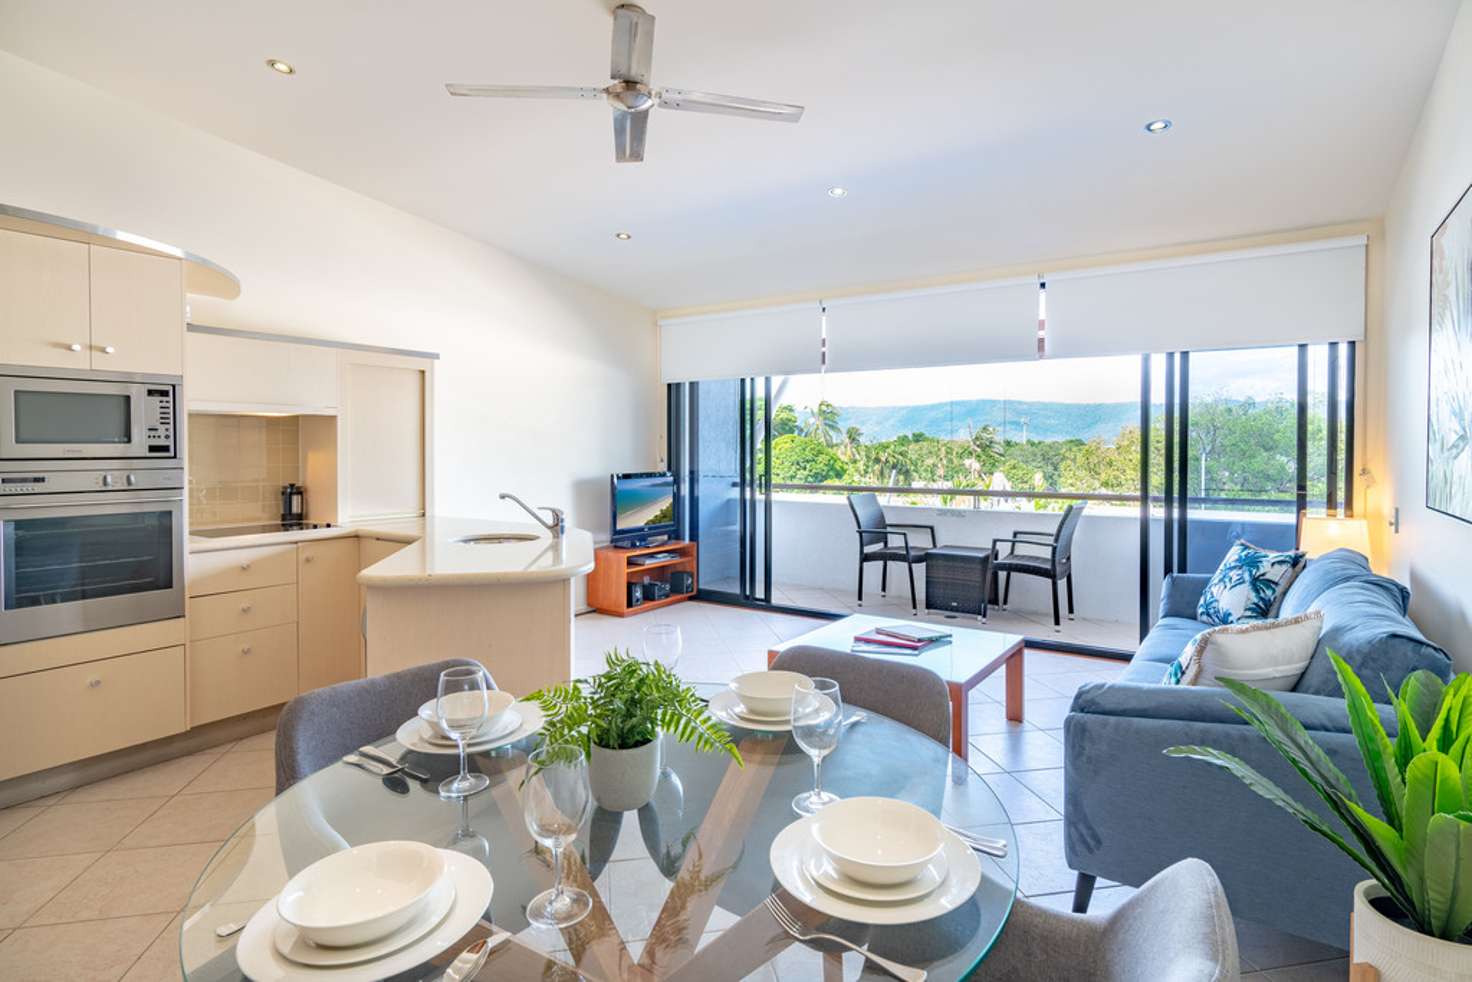 Main view of Homely apartment listing, 14/26-30 Macrossan Street, Port Douglas QLD 4877